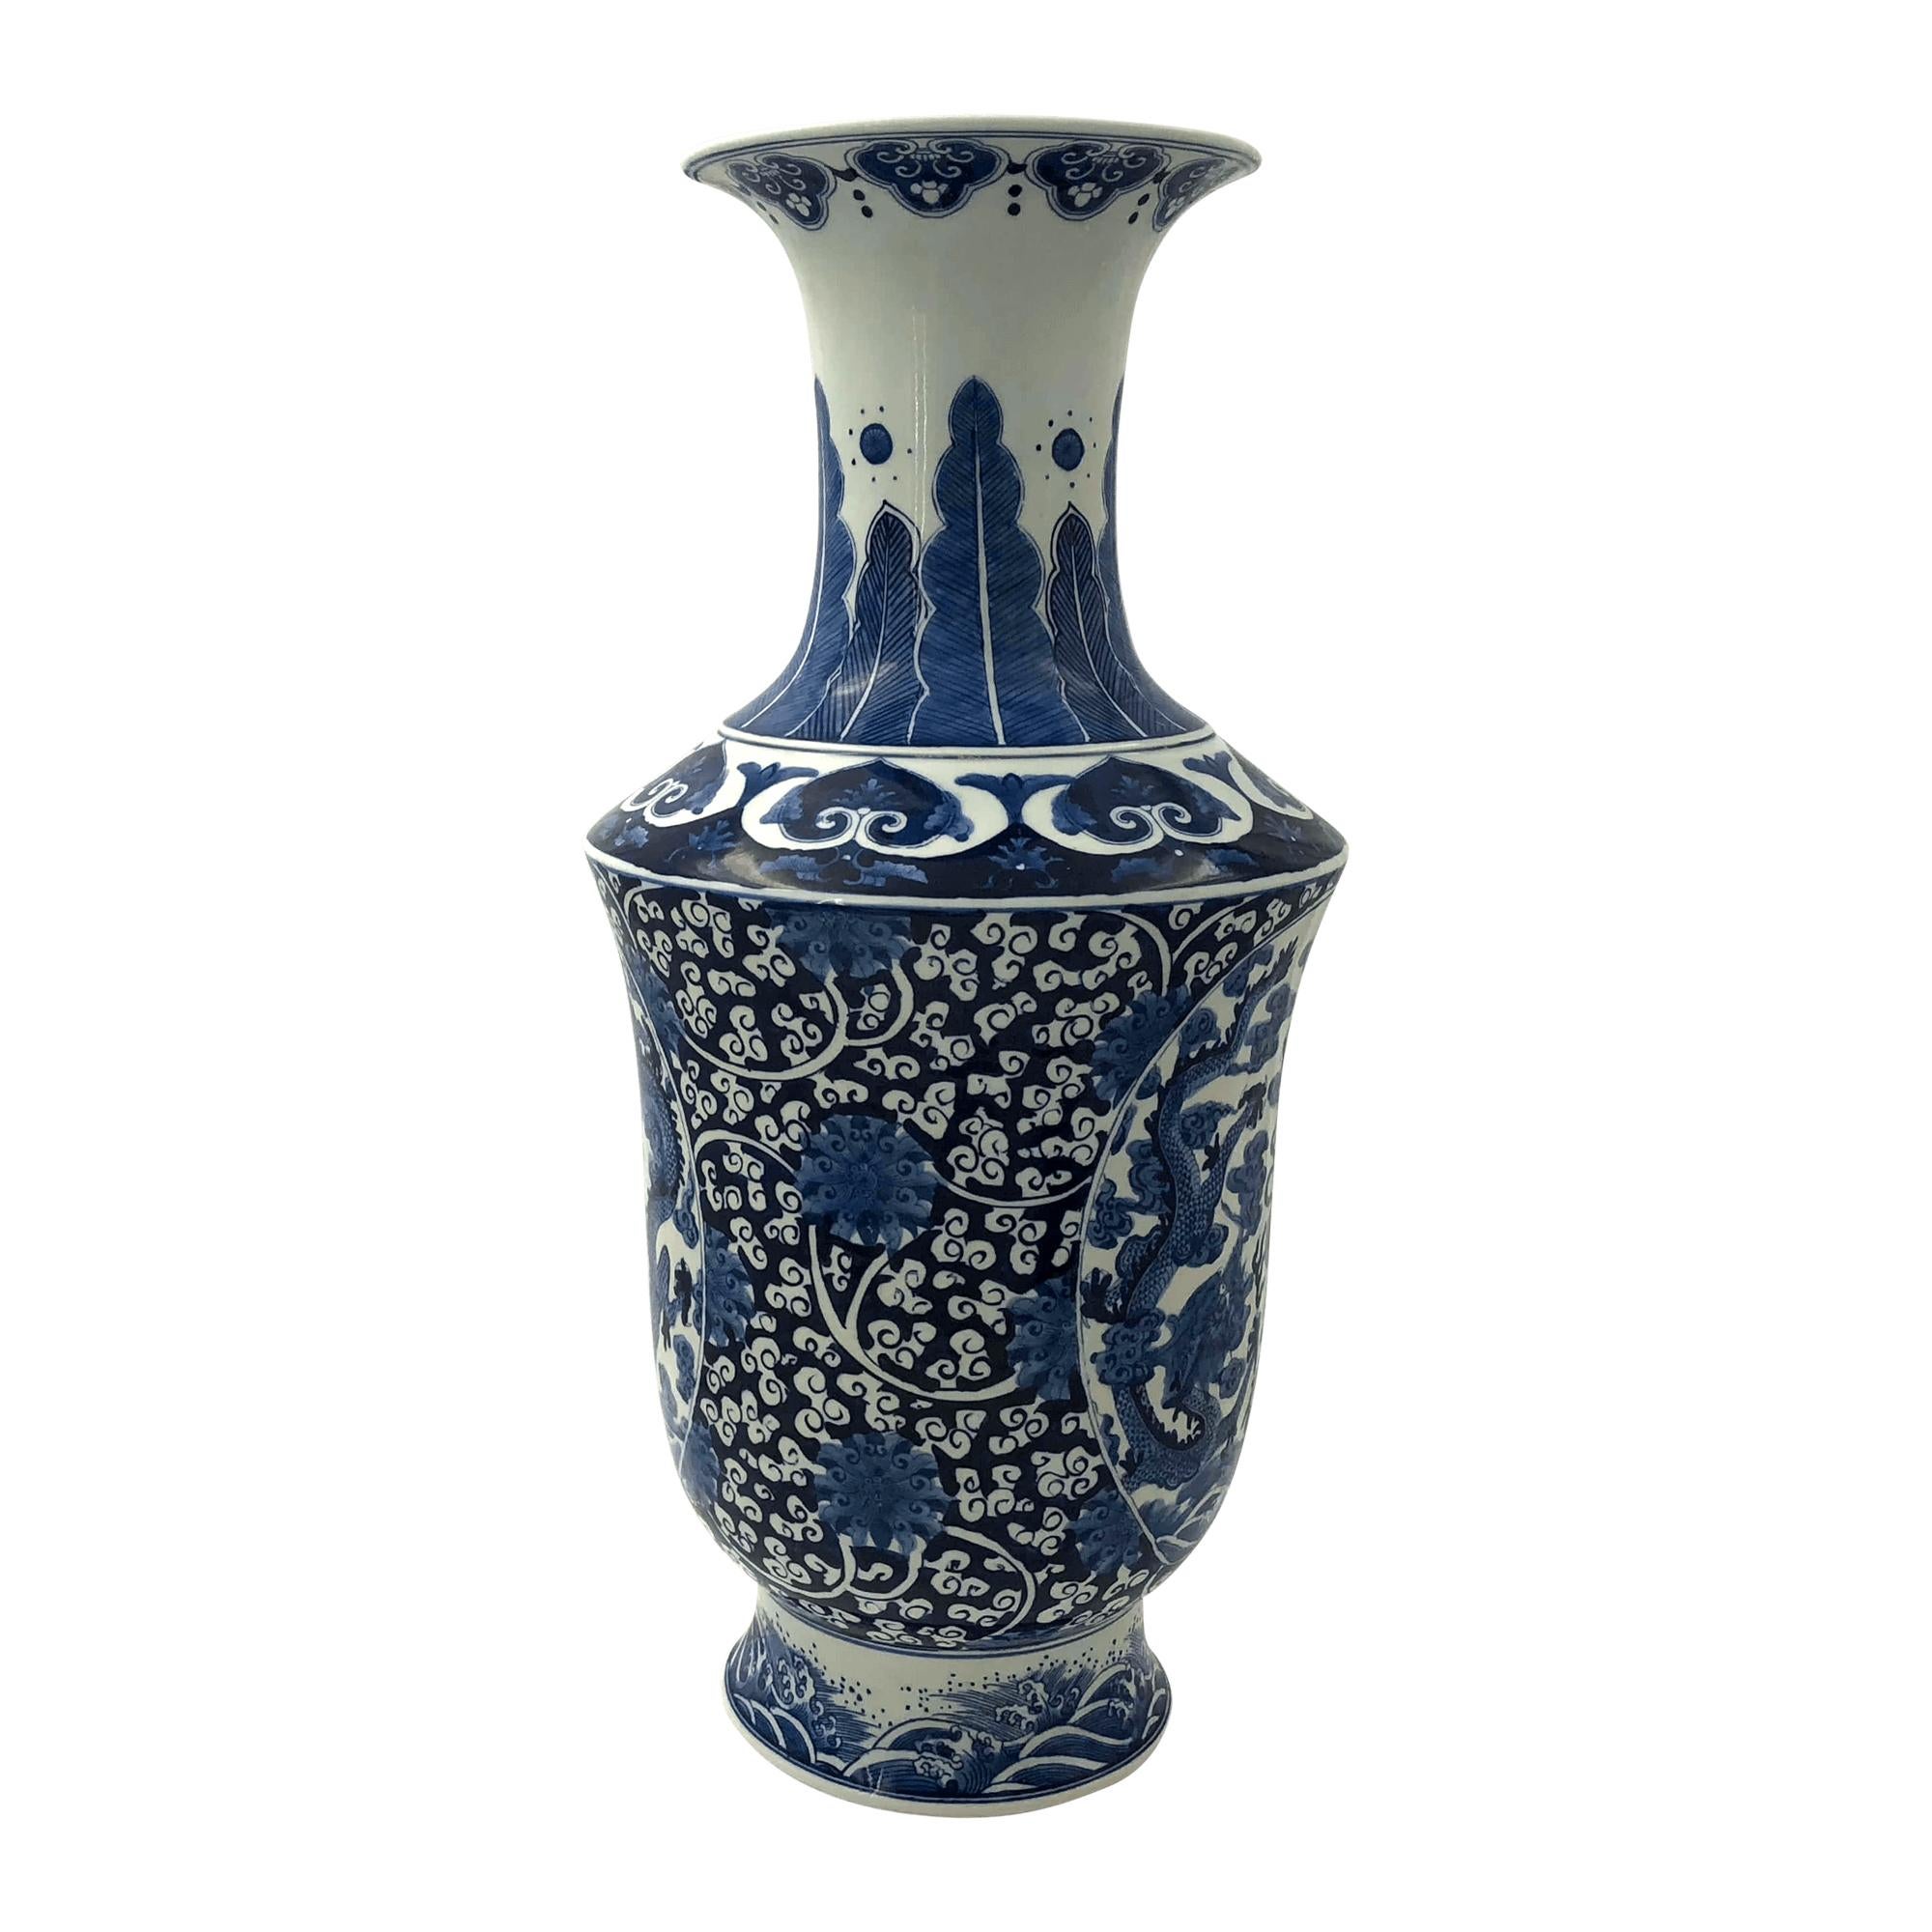 An unusual form Chinese export porcelain blue and white tall vase with flared rim and decorated with flowers.